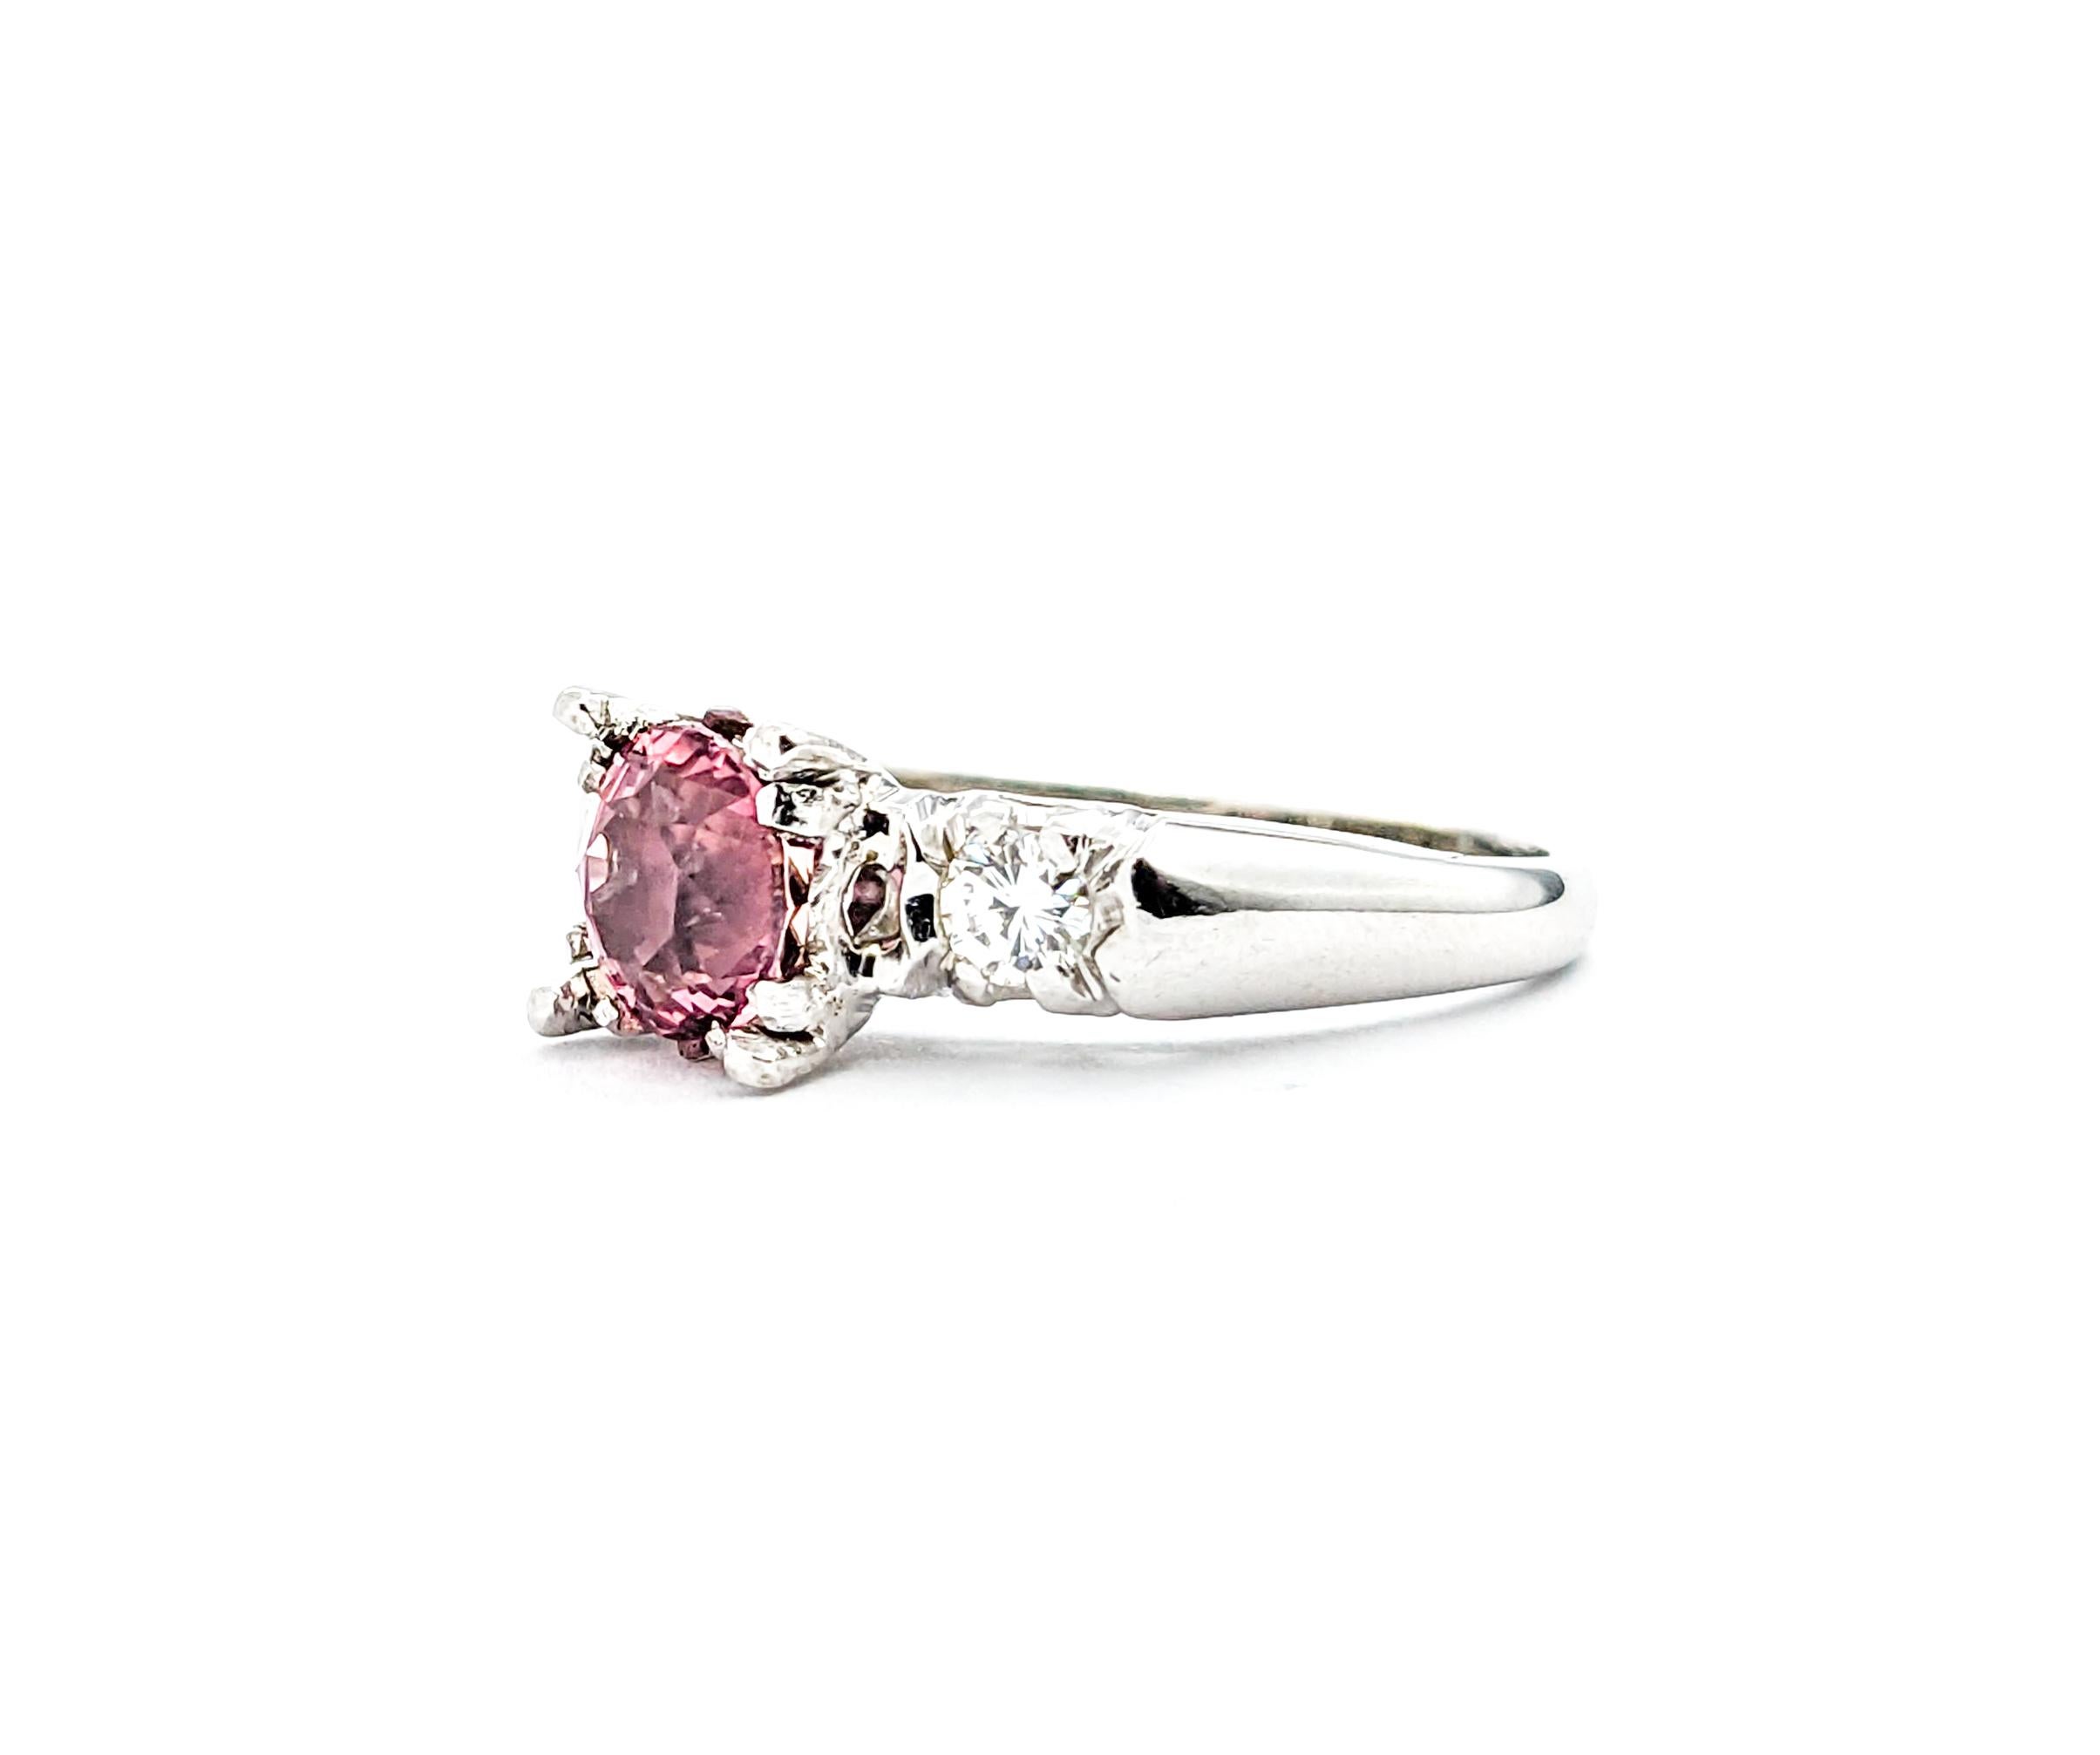 Vintage 1.48ct Pink Tourmaline & Diamonds Ring White Gold For Sale 1